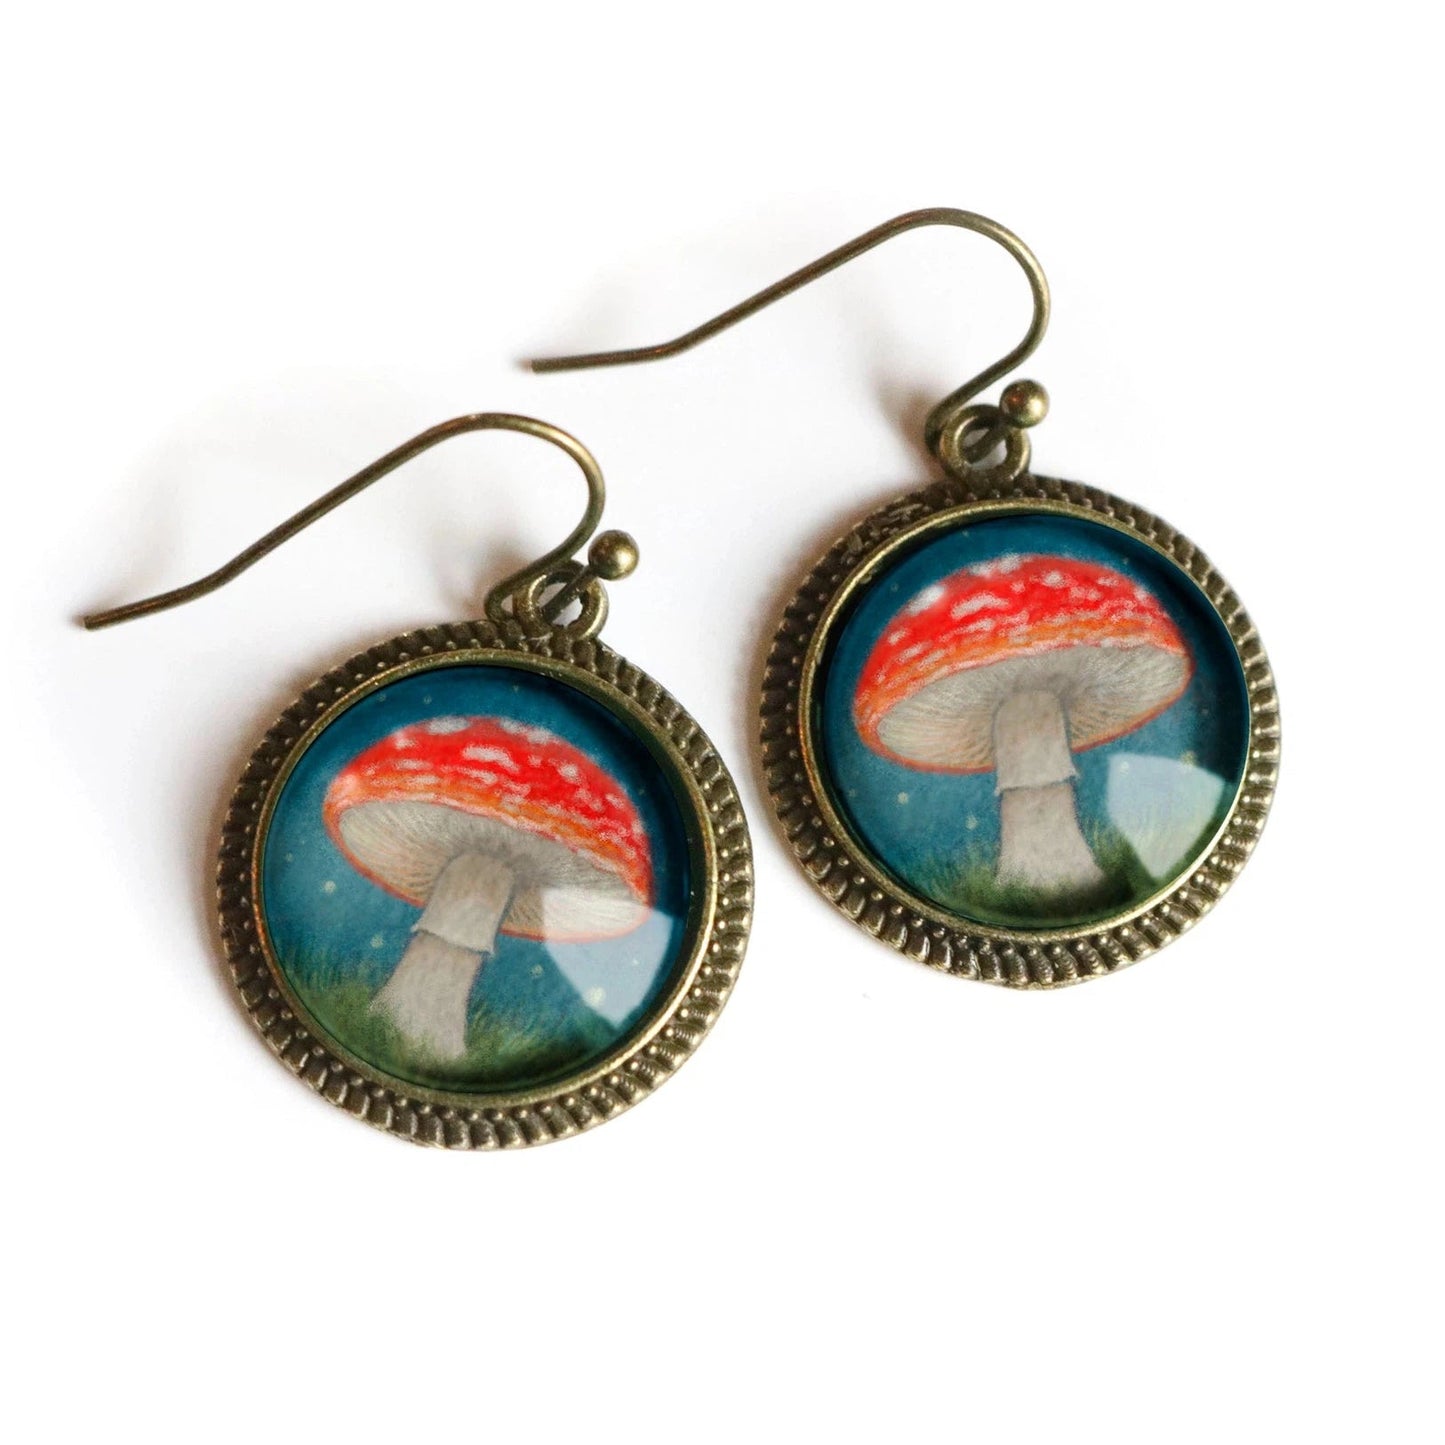 Moonlit Mushrooms Cottagecore Glass Cabochon Earrings | Handmade in the US